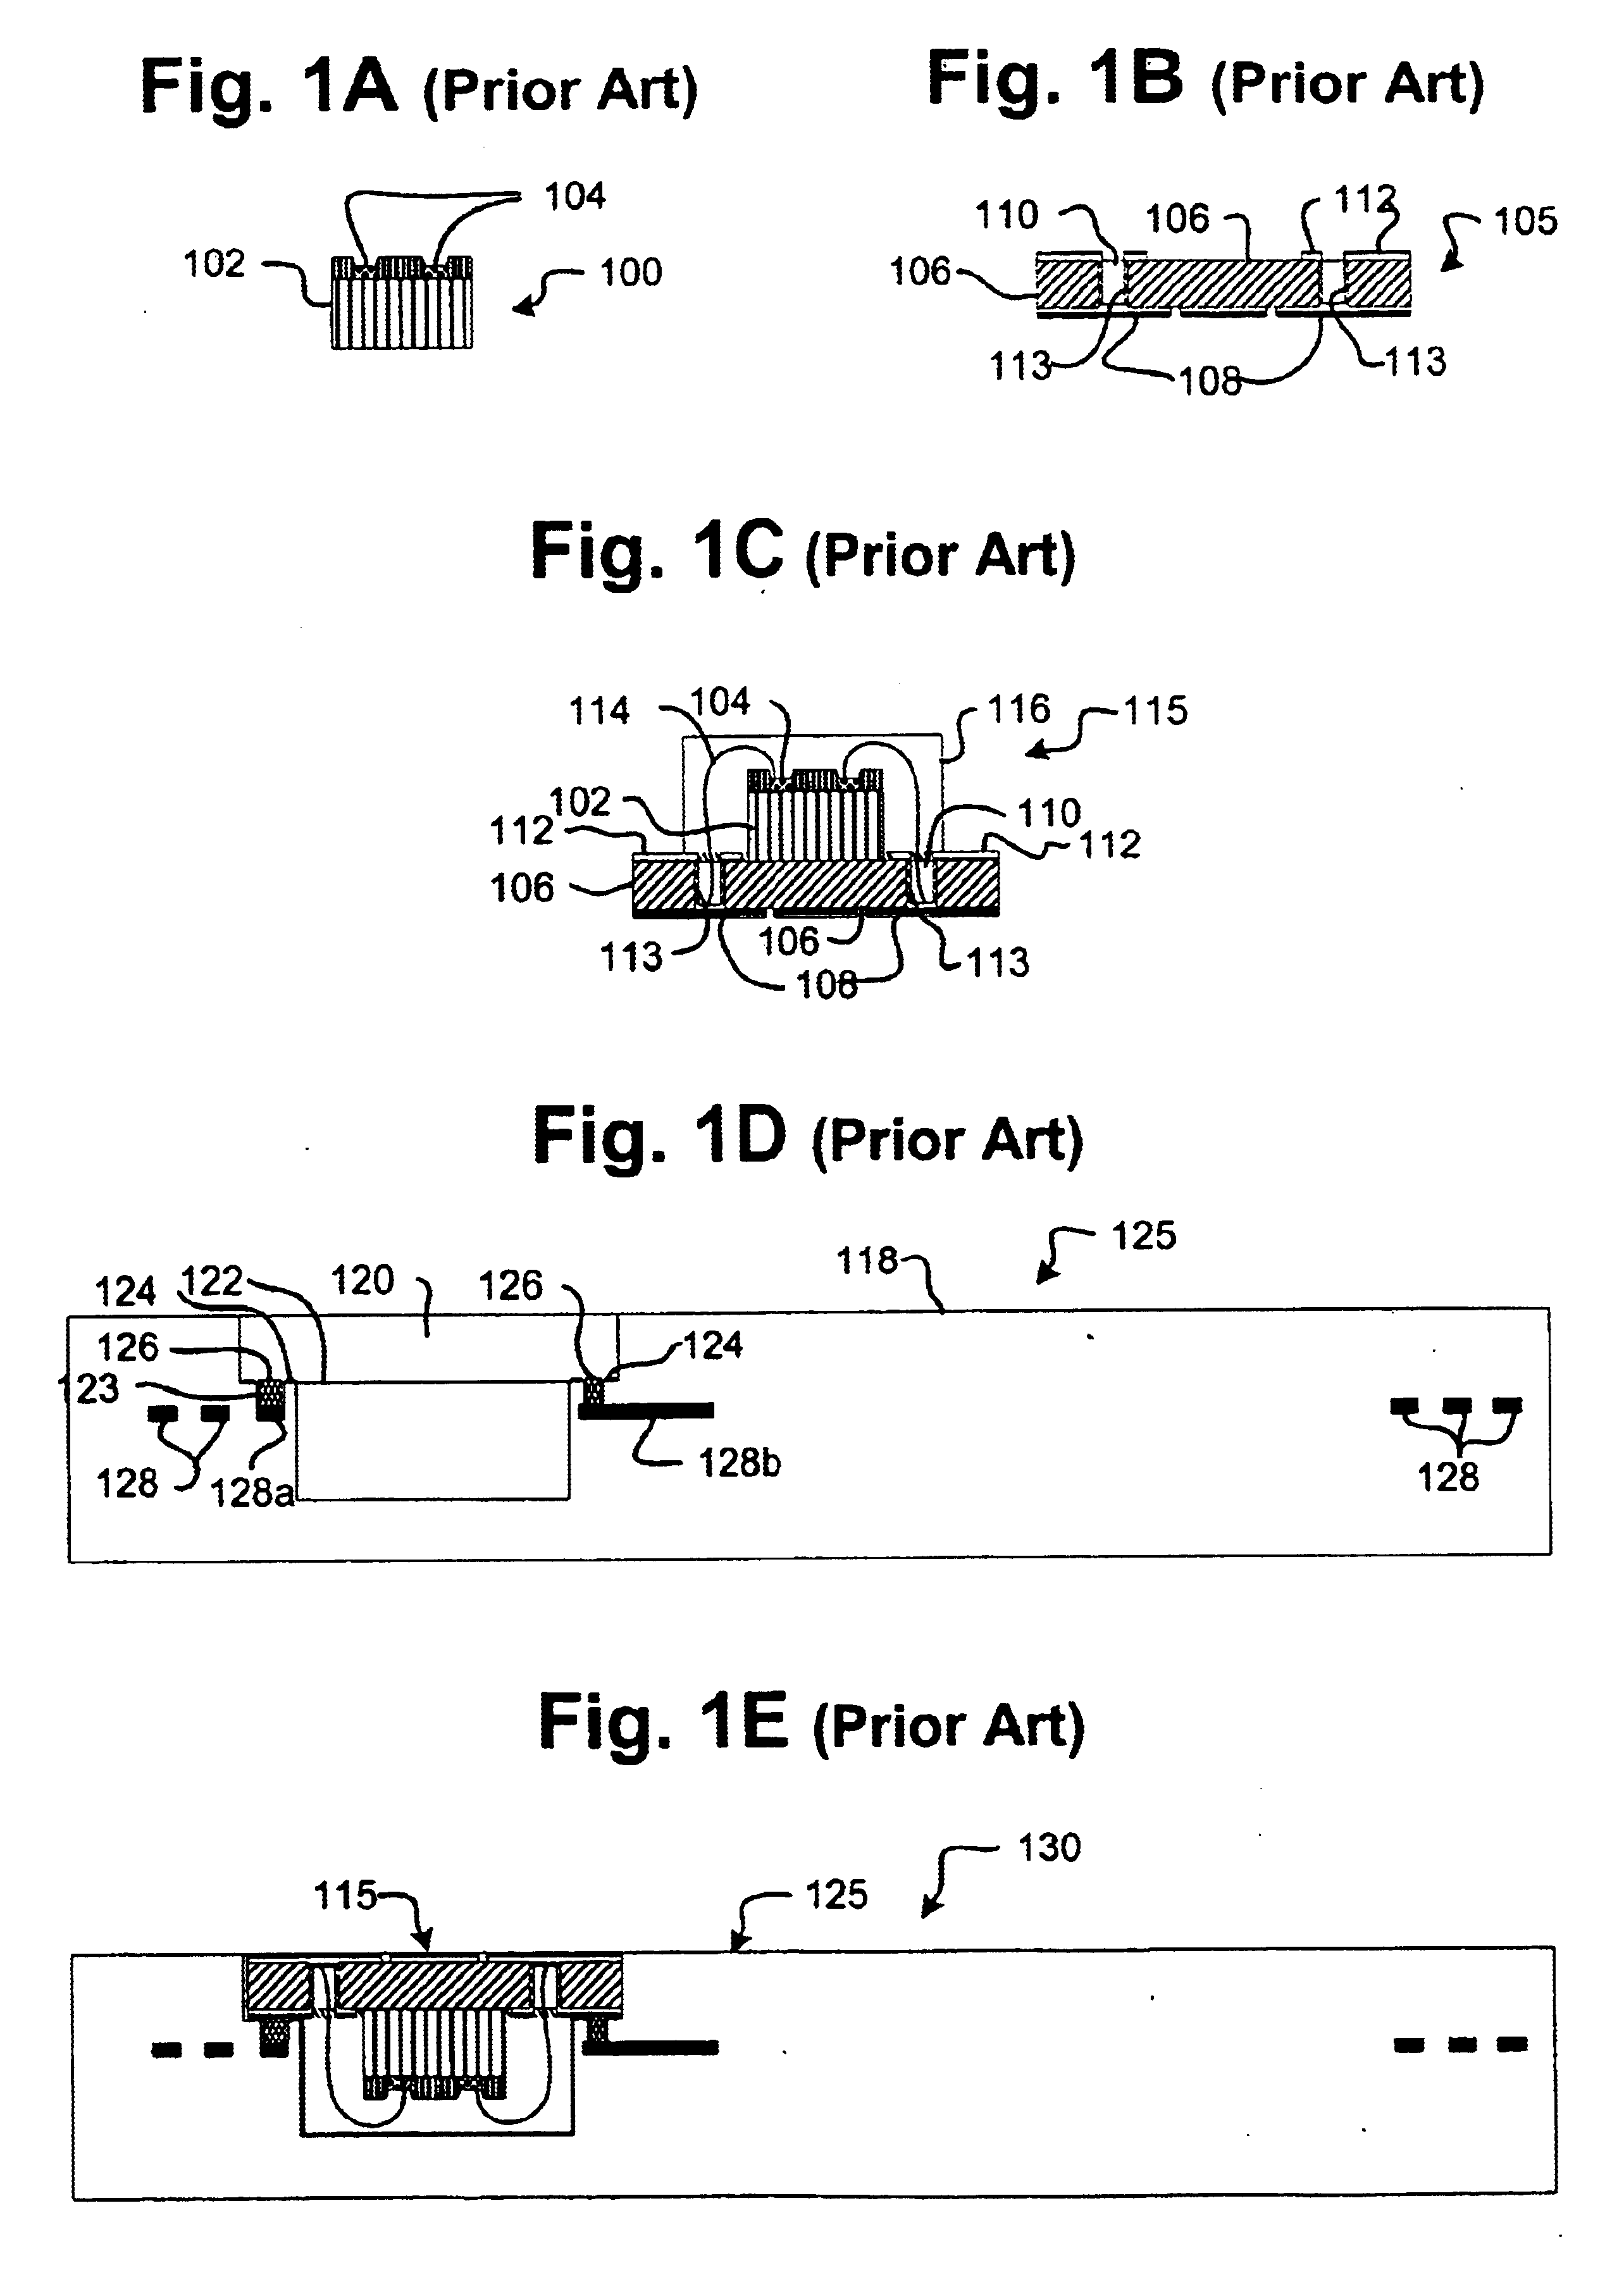 Component and antennae assembly in radio frequency identification devices